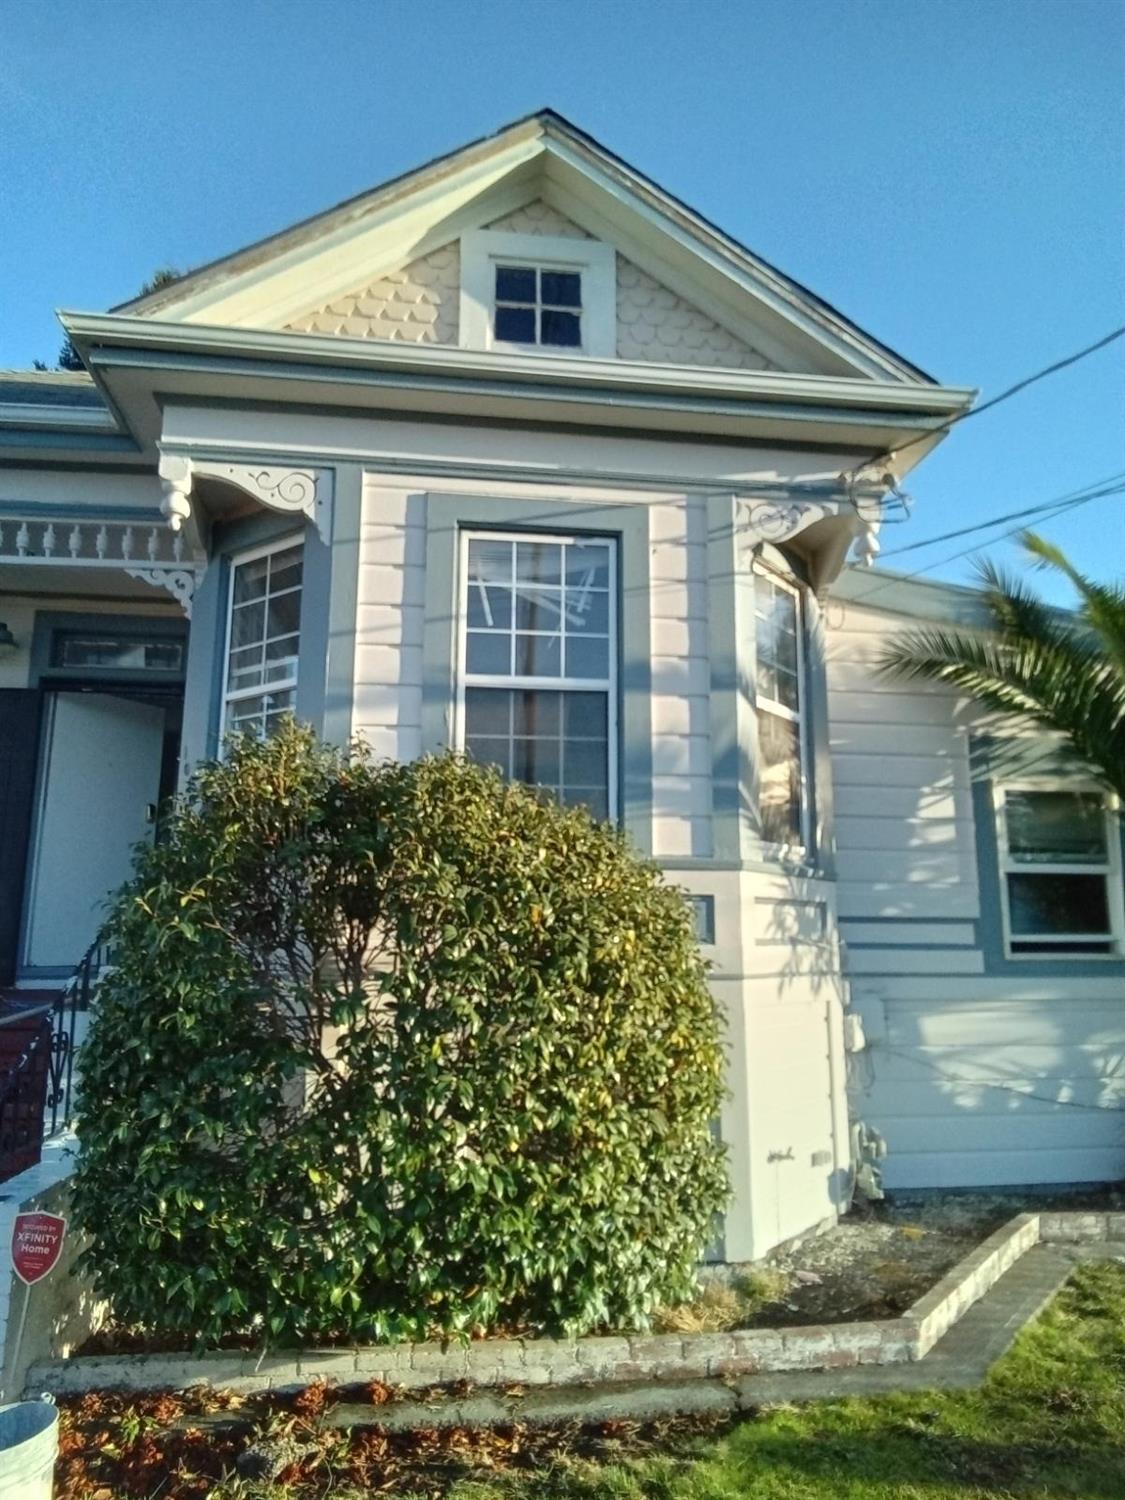 Photo of 1648 92nd Ave in Oakland, CA